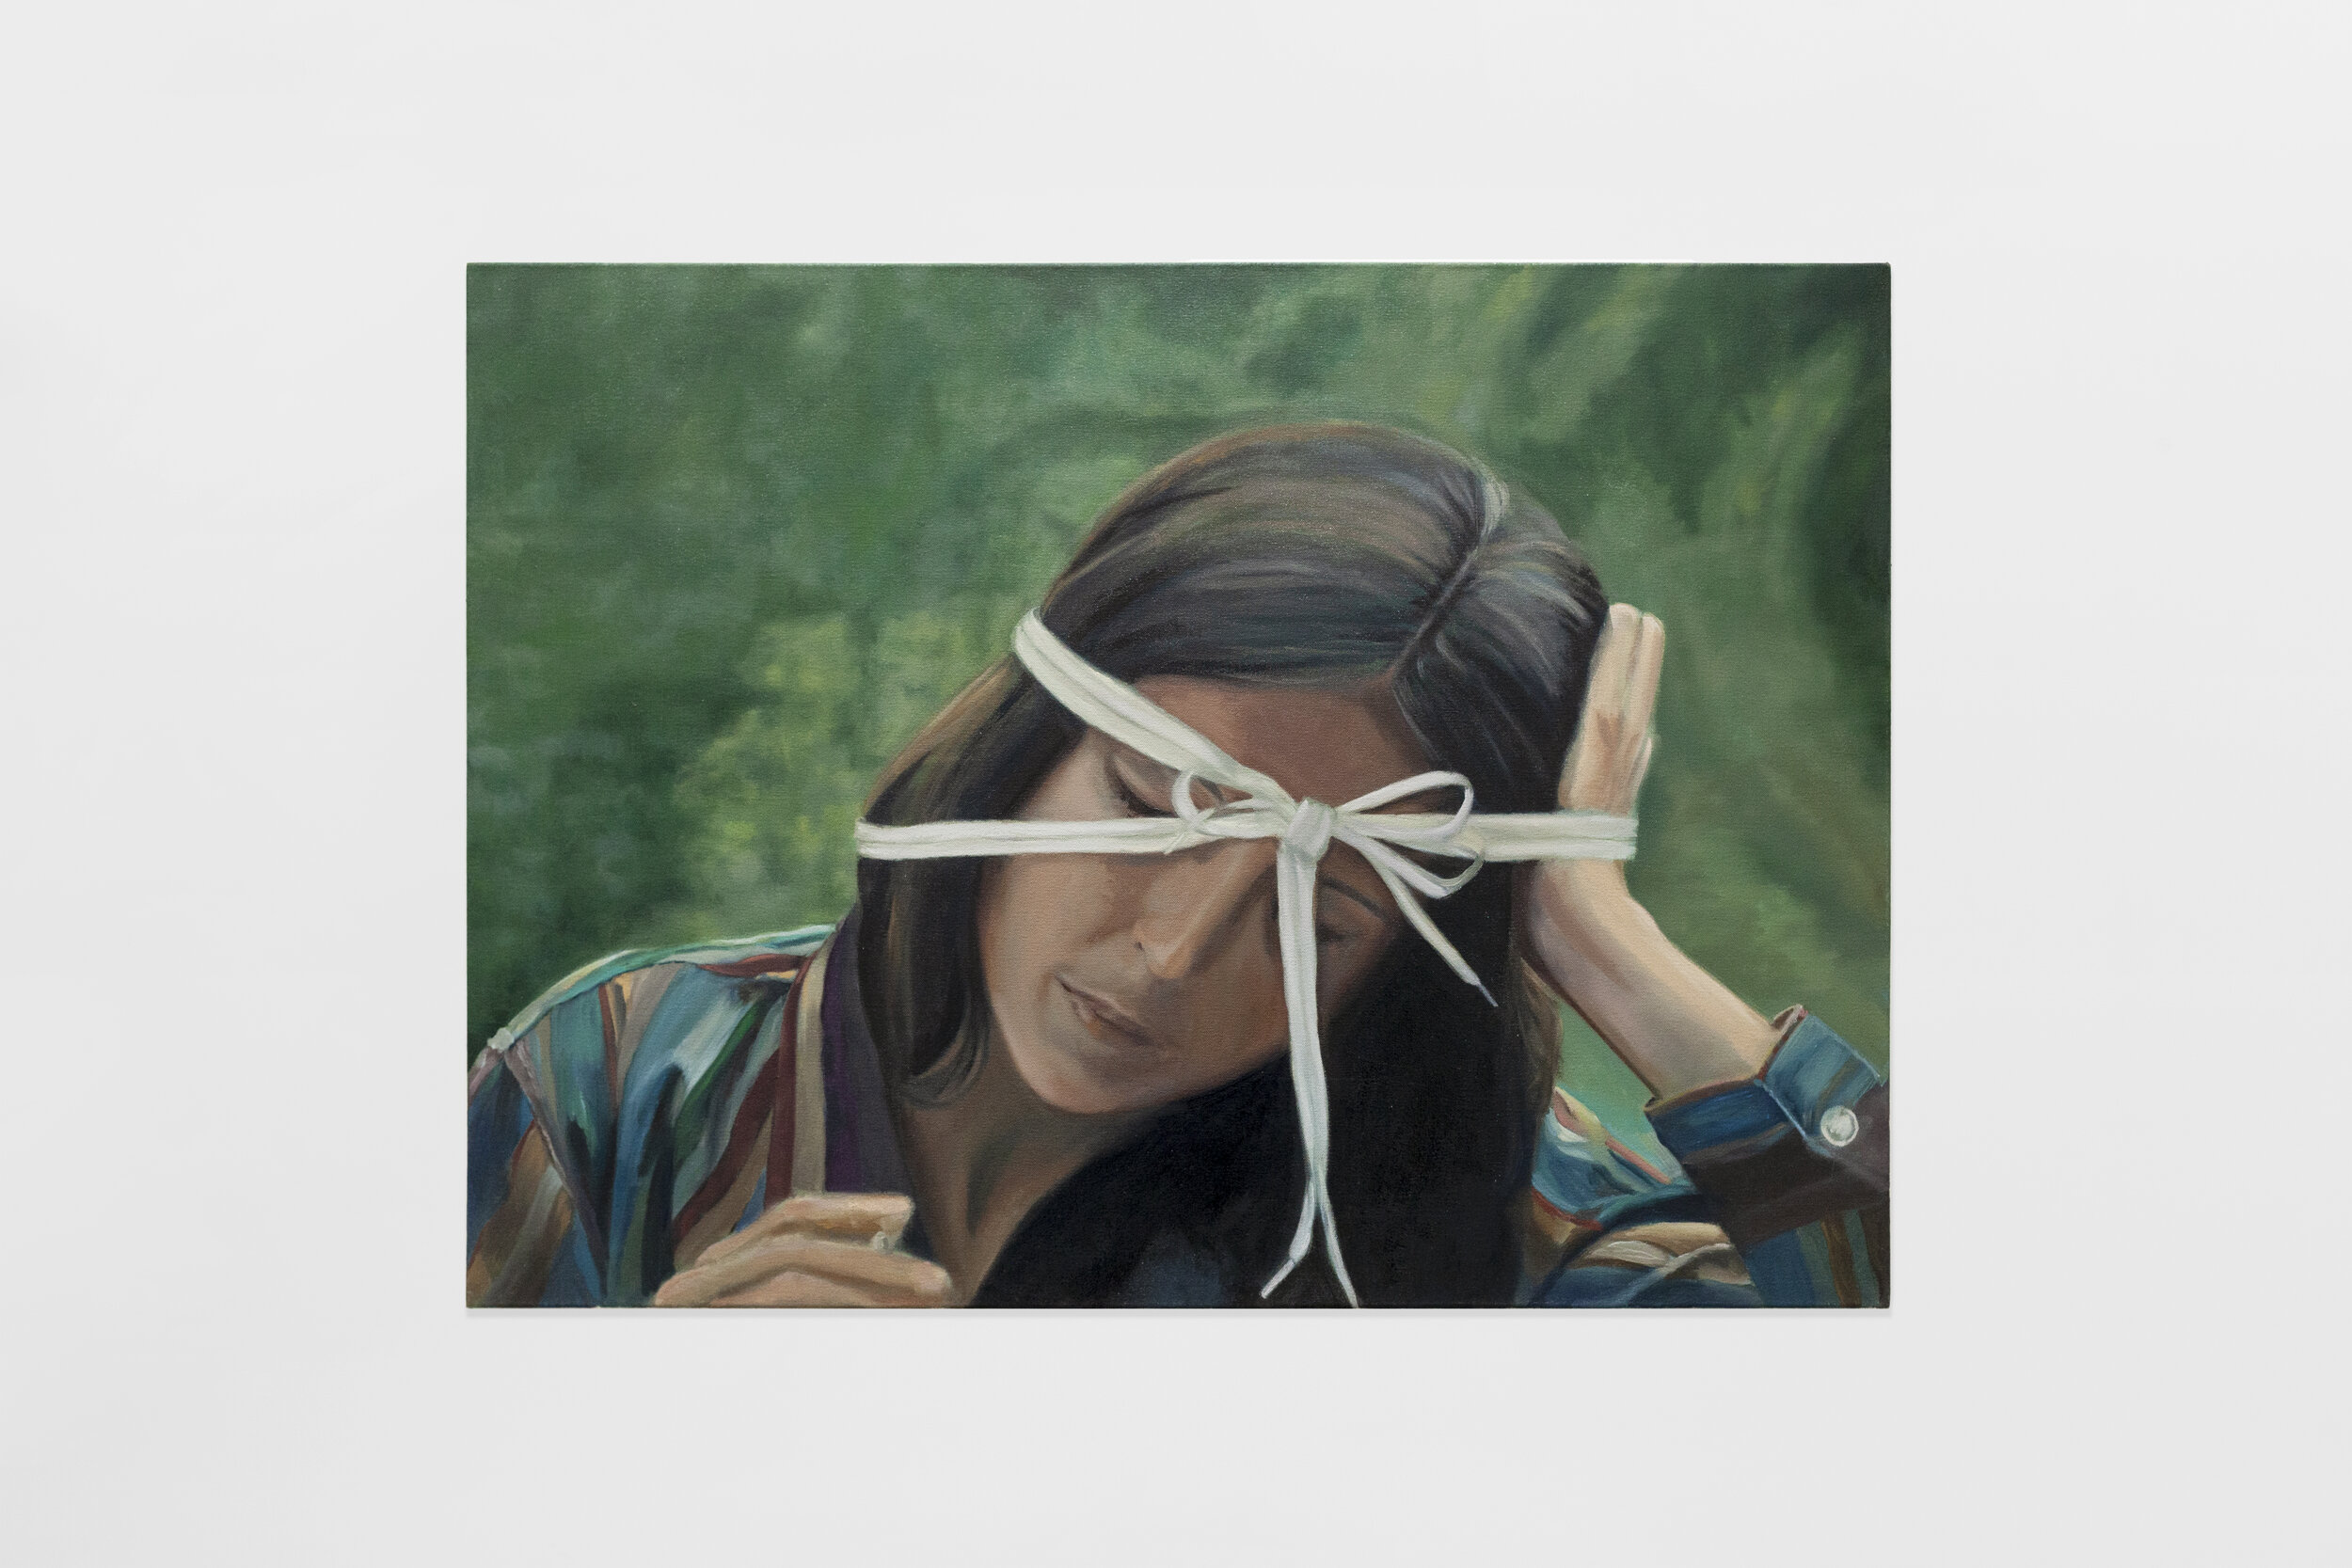  Shannon Cartier Lucy,  Woman with Shoestrings , 2019, Oil on canvas, 25 x 34 in. 